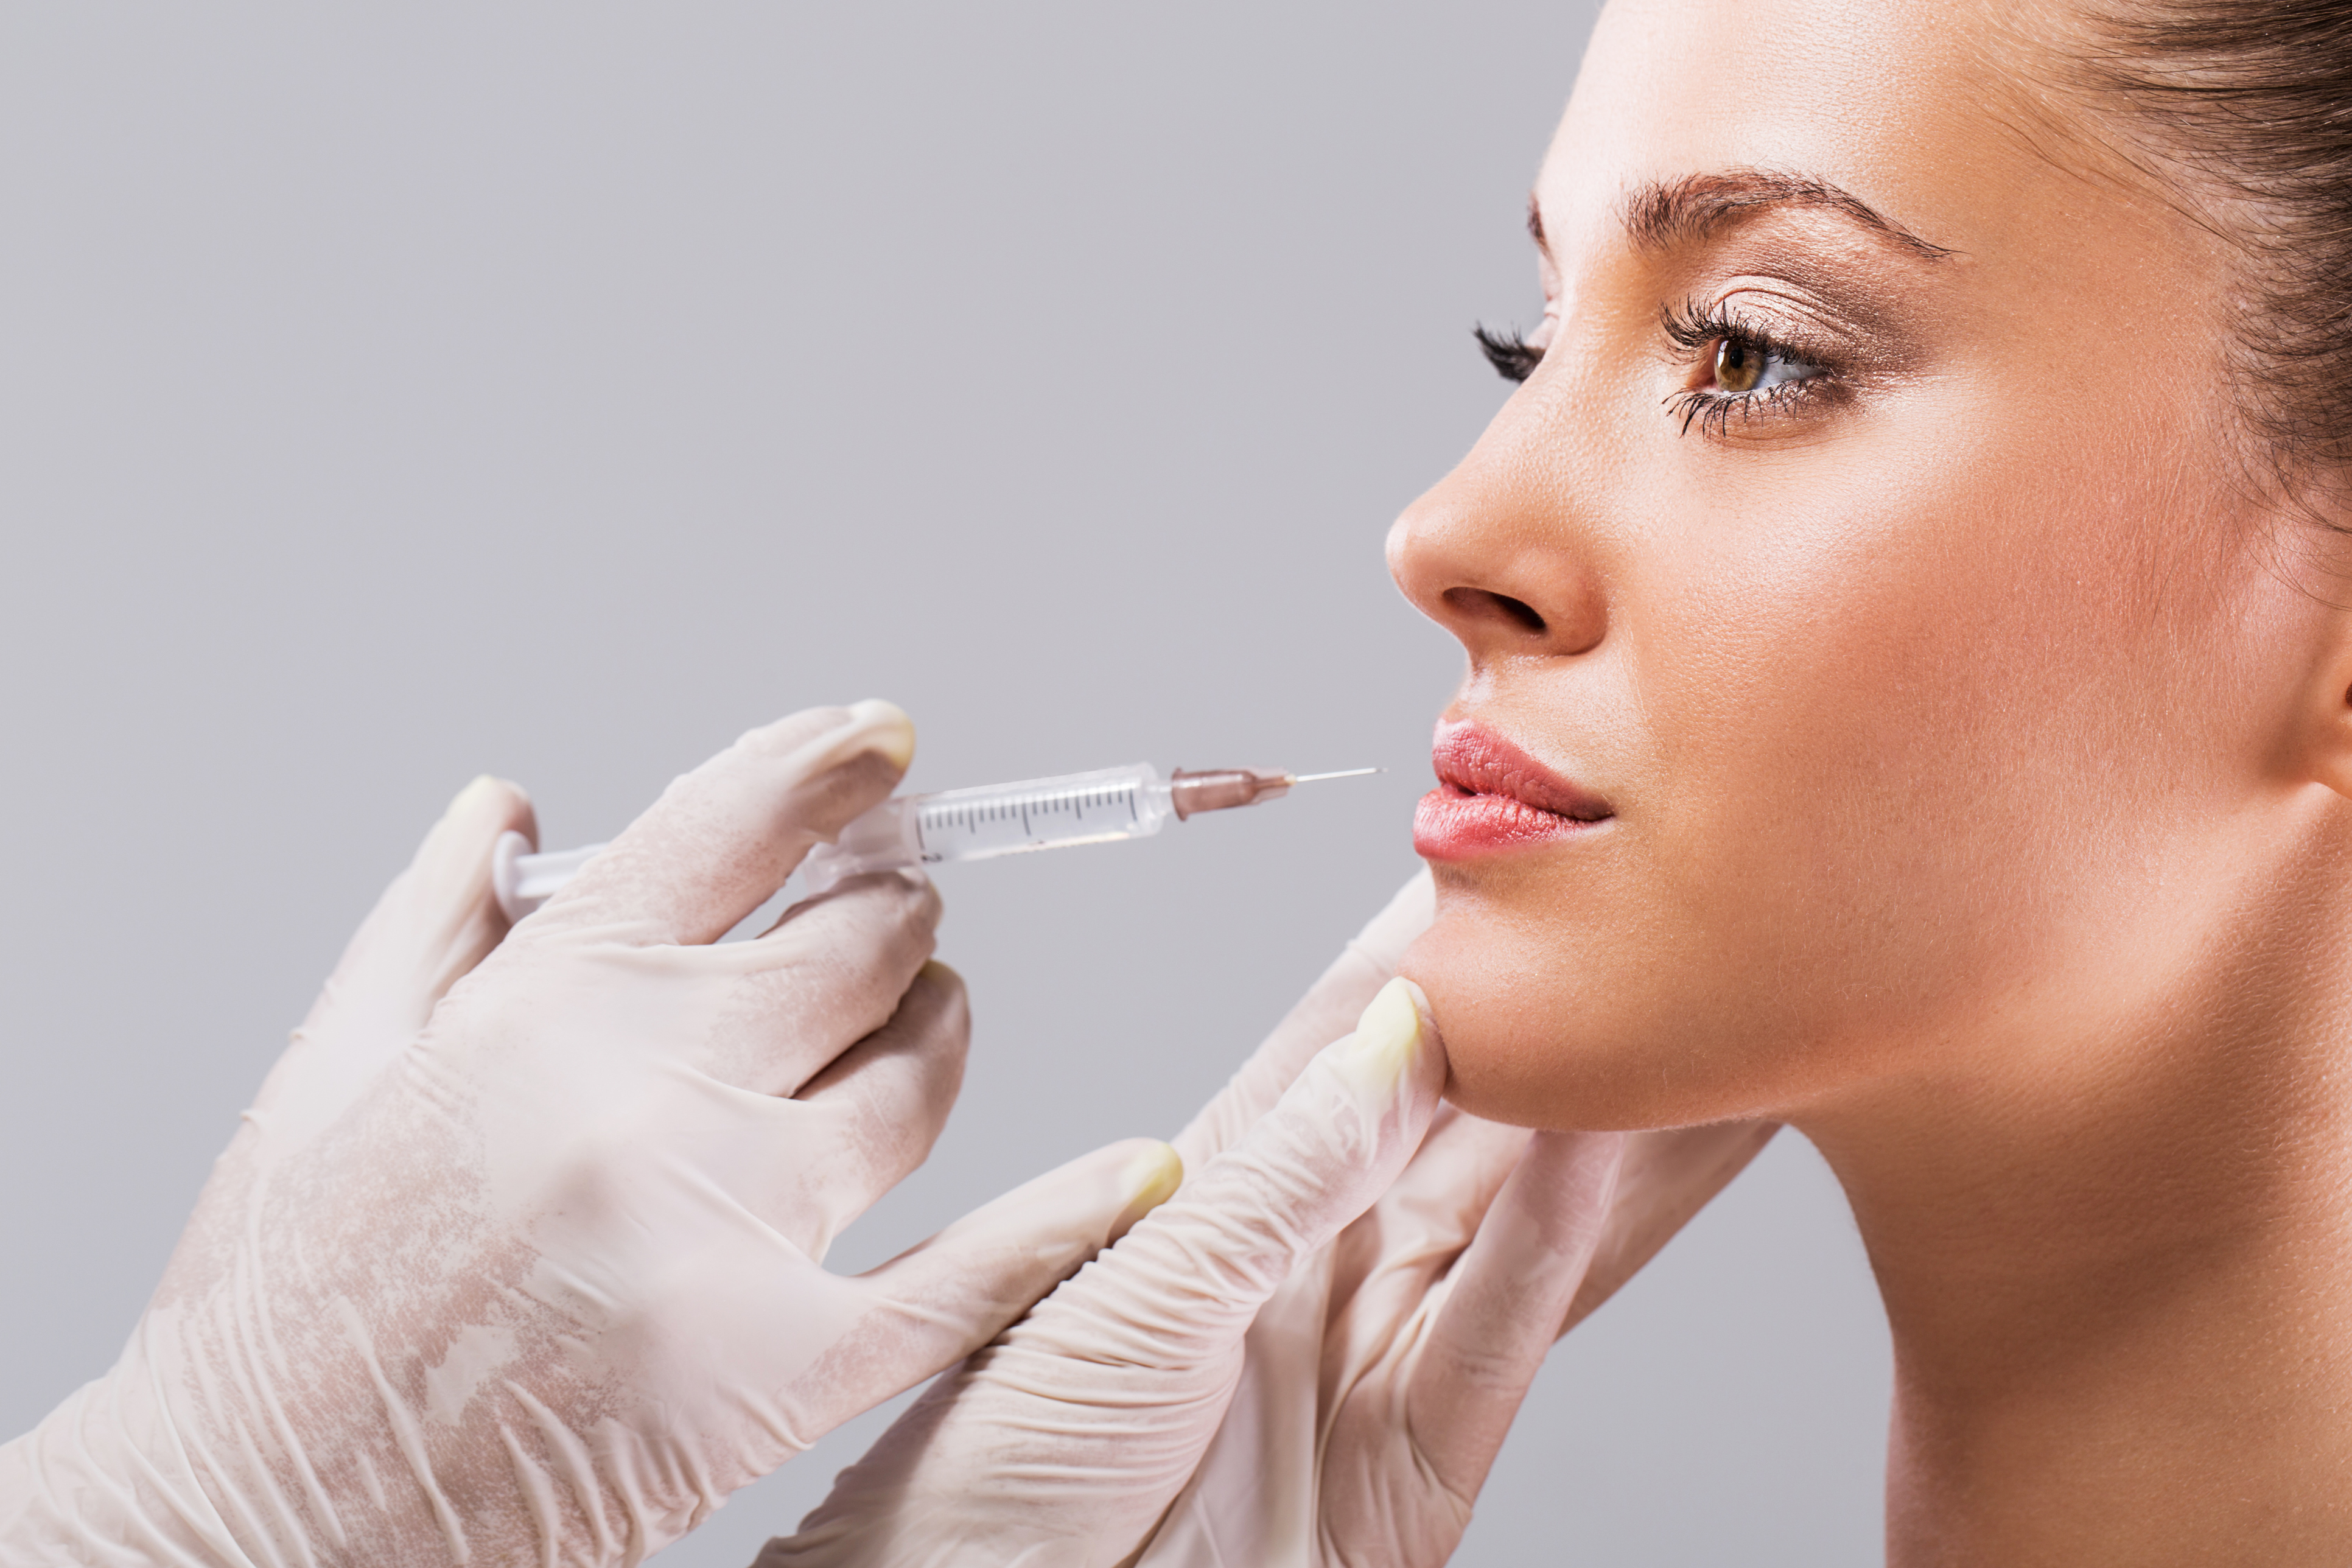 Find out common myths about lip injections or lip fillers